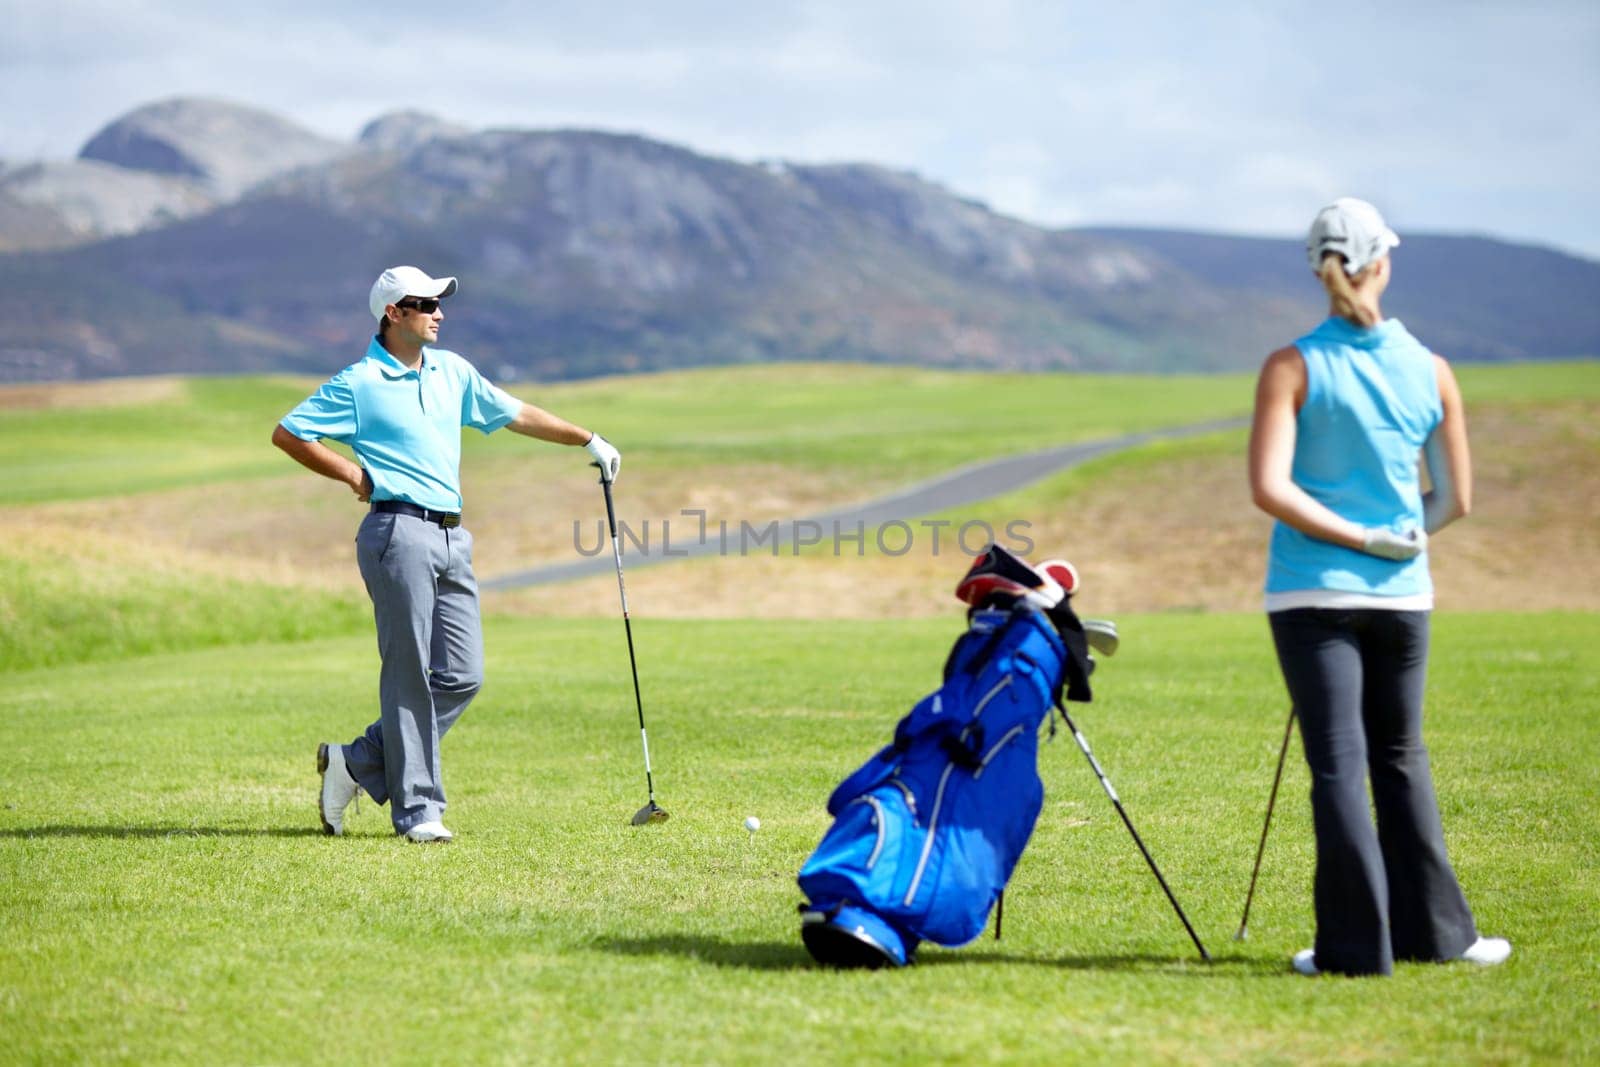 Couple, teamwork or golfer playing golf for fitness, workout or exercise together on green course field. Healthy people, woman golfing or athlete training in action or sports game driving with clubs by YuriArcurs